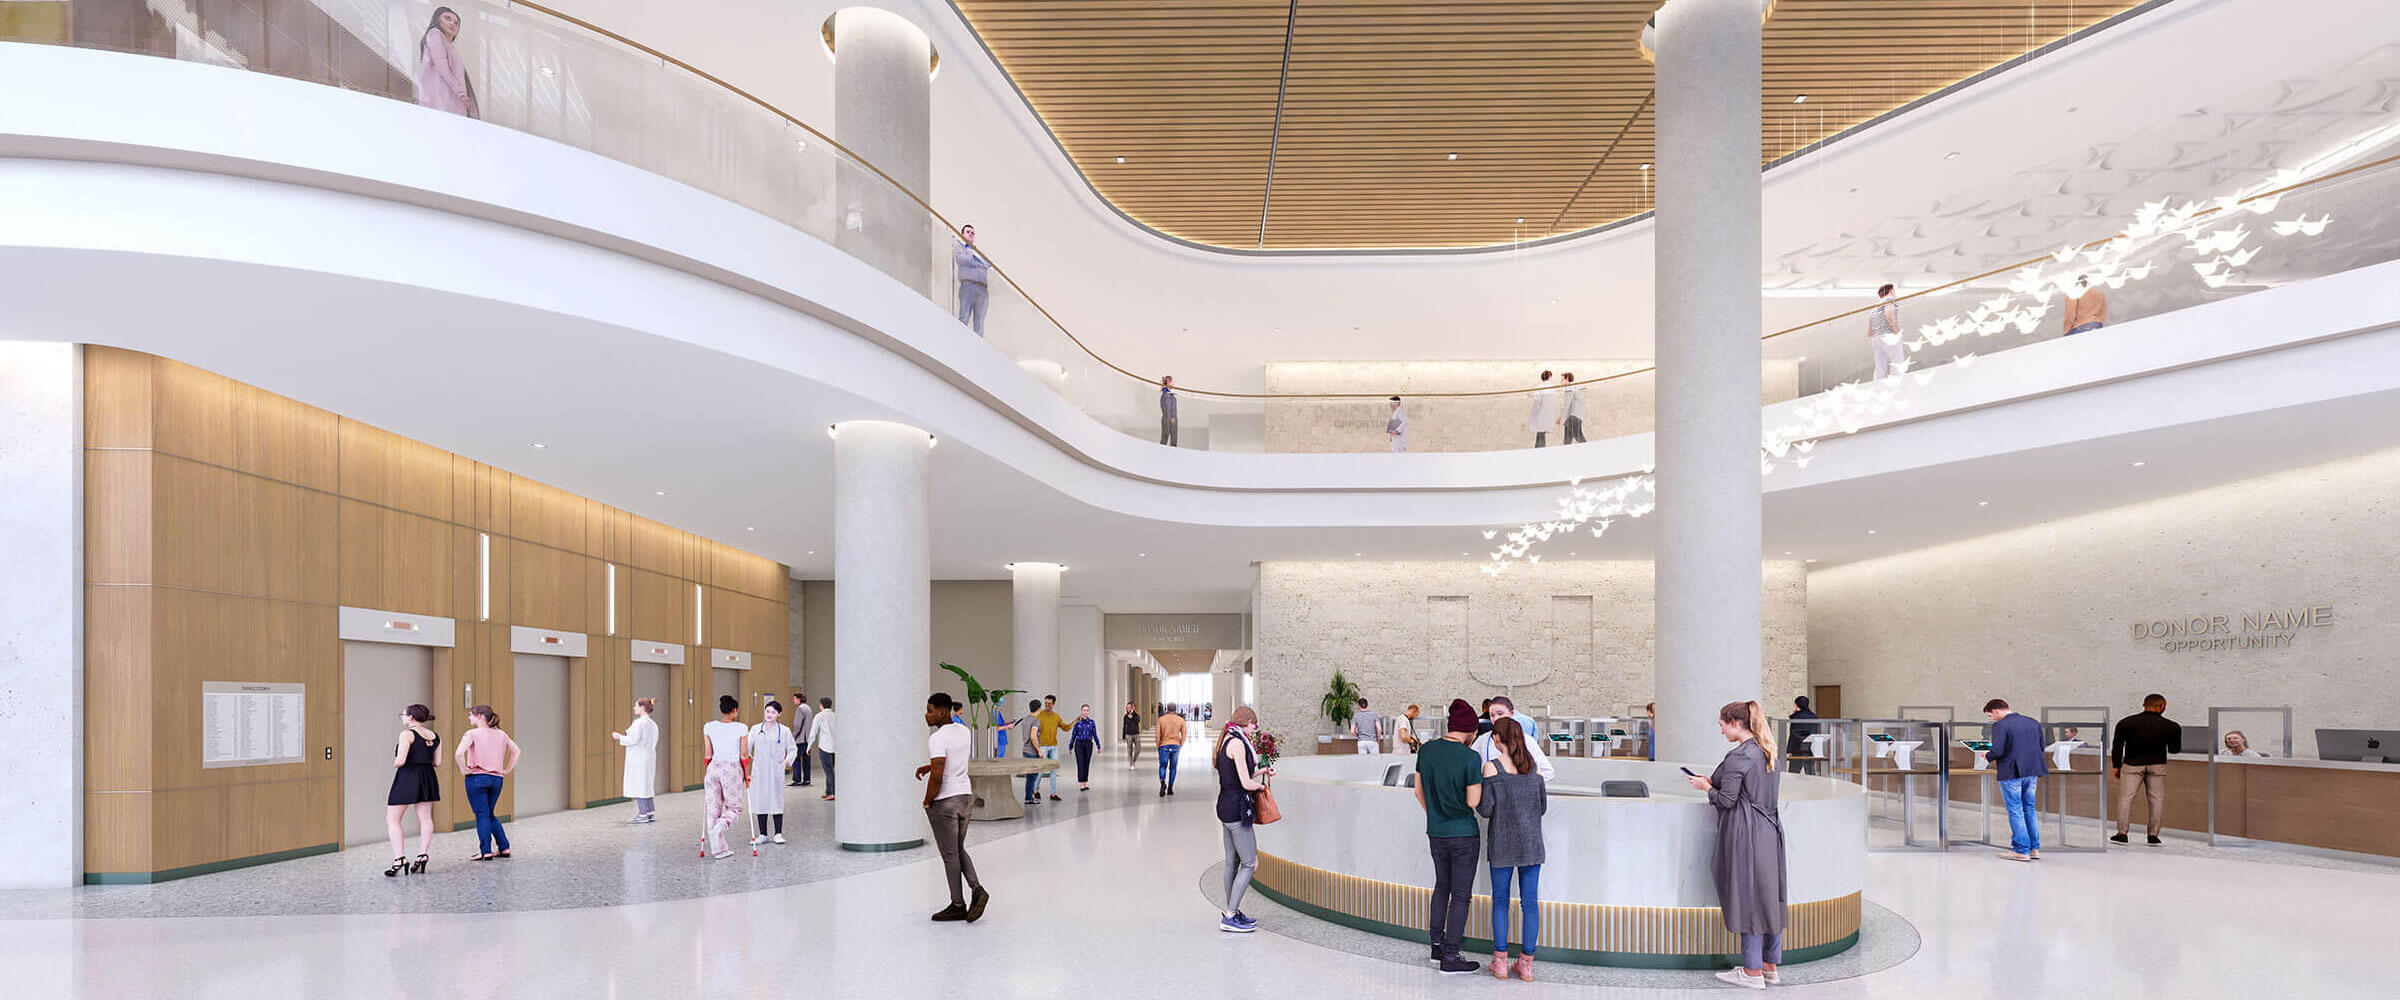 Entrance Architectural Rendering of UHealth at SoLé Mia in Aventura